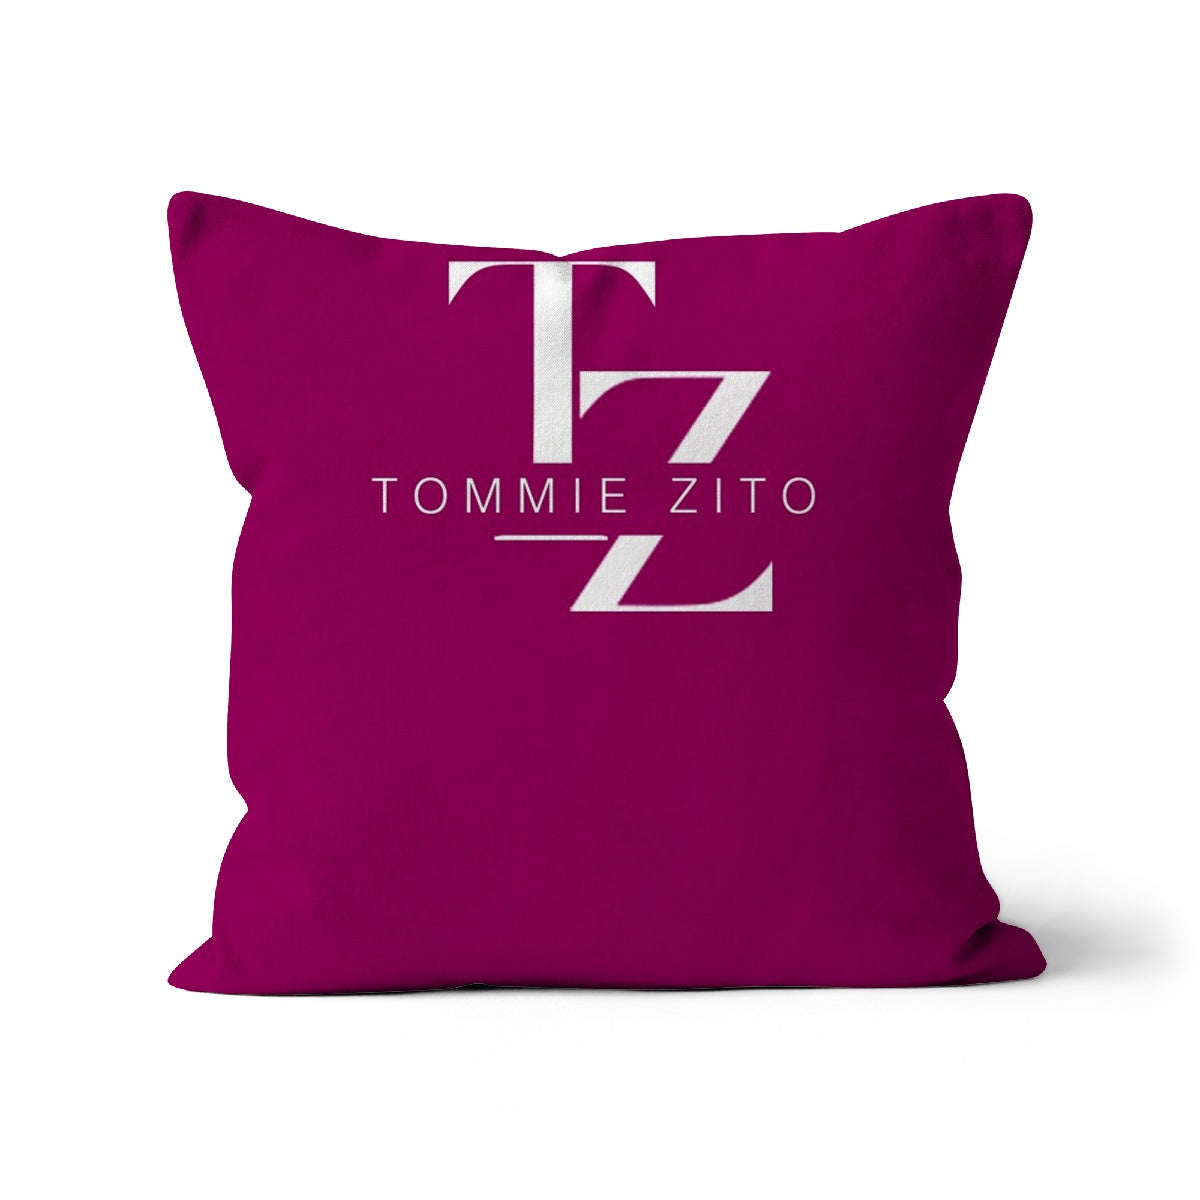 Tommie Zito  Cushion